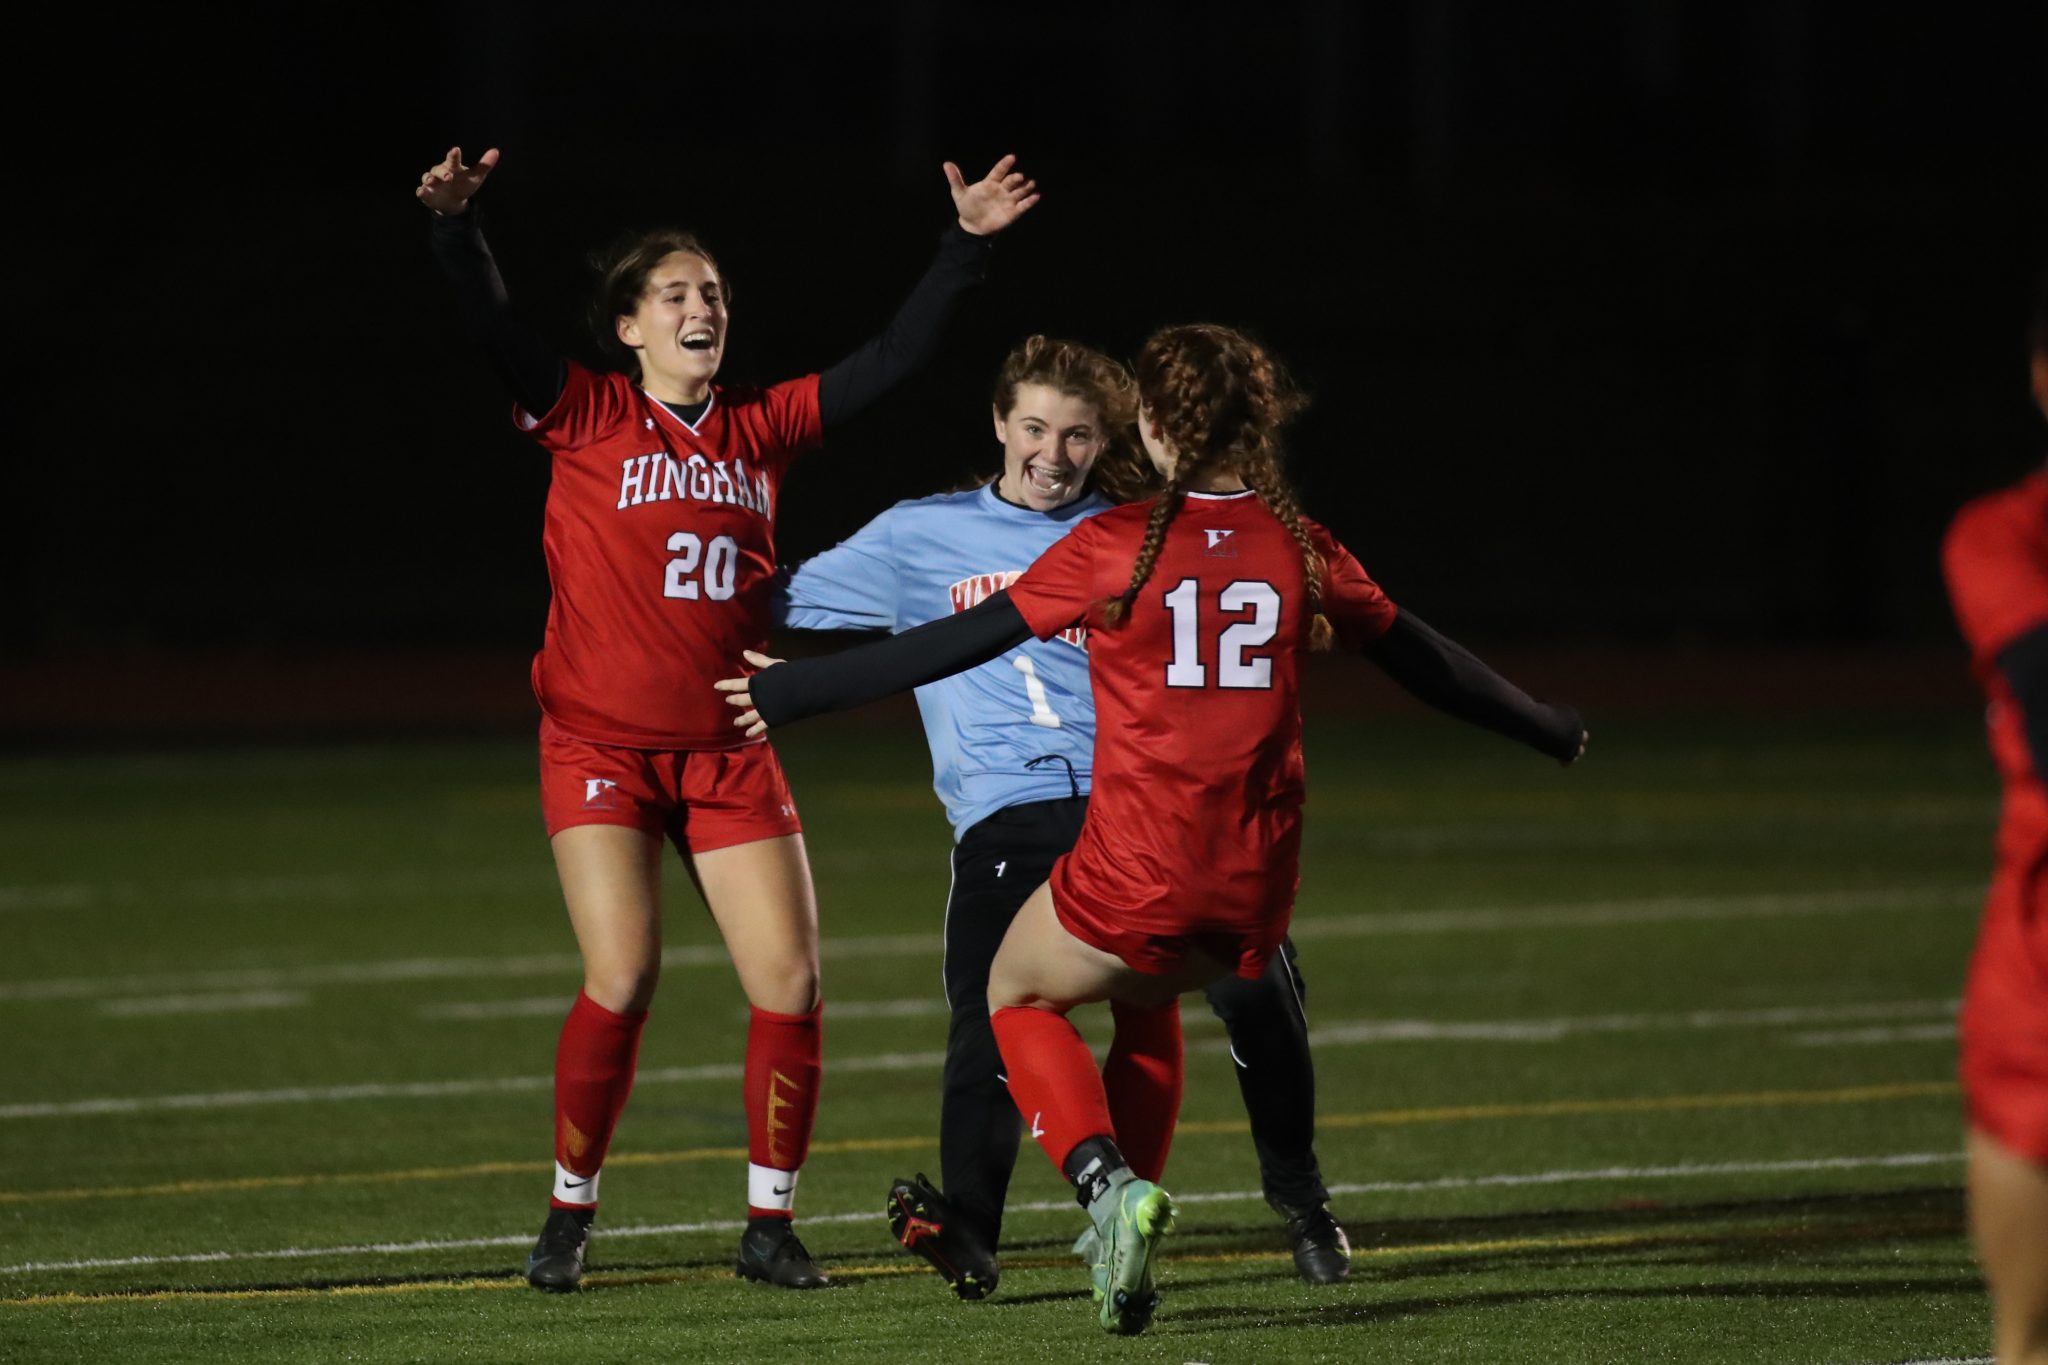 Junior Ava Varholak's goal in the 6th round of penalty shots sends Hingham back to the finals.